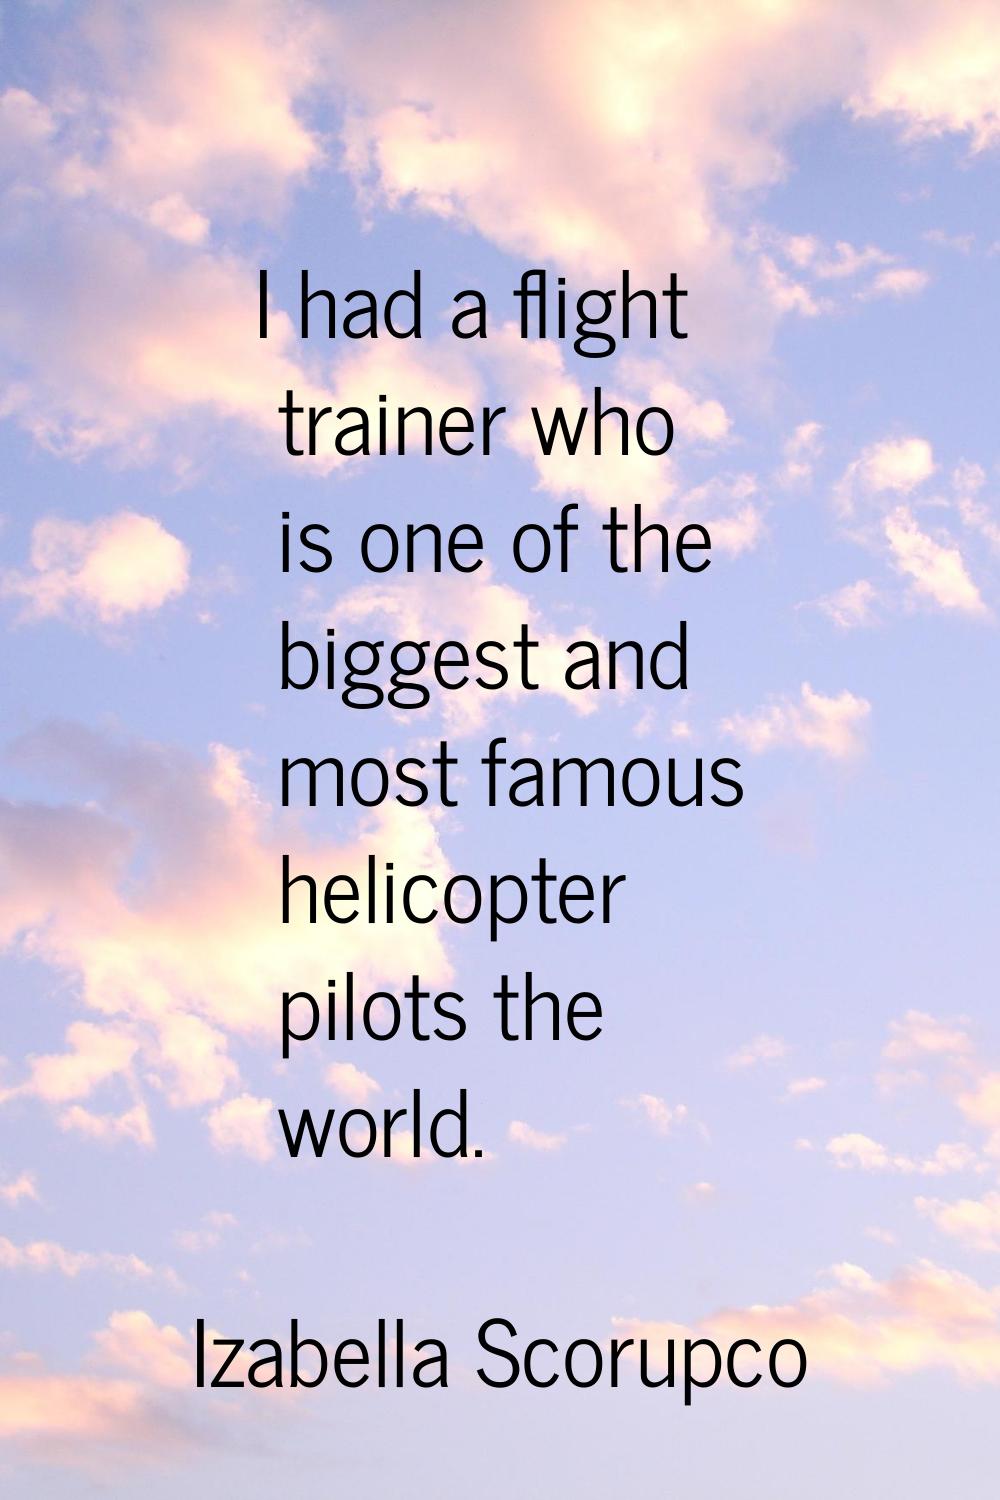 I had a flight trainer who is one of the biggest and most famous helicopter pilots the world.